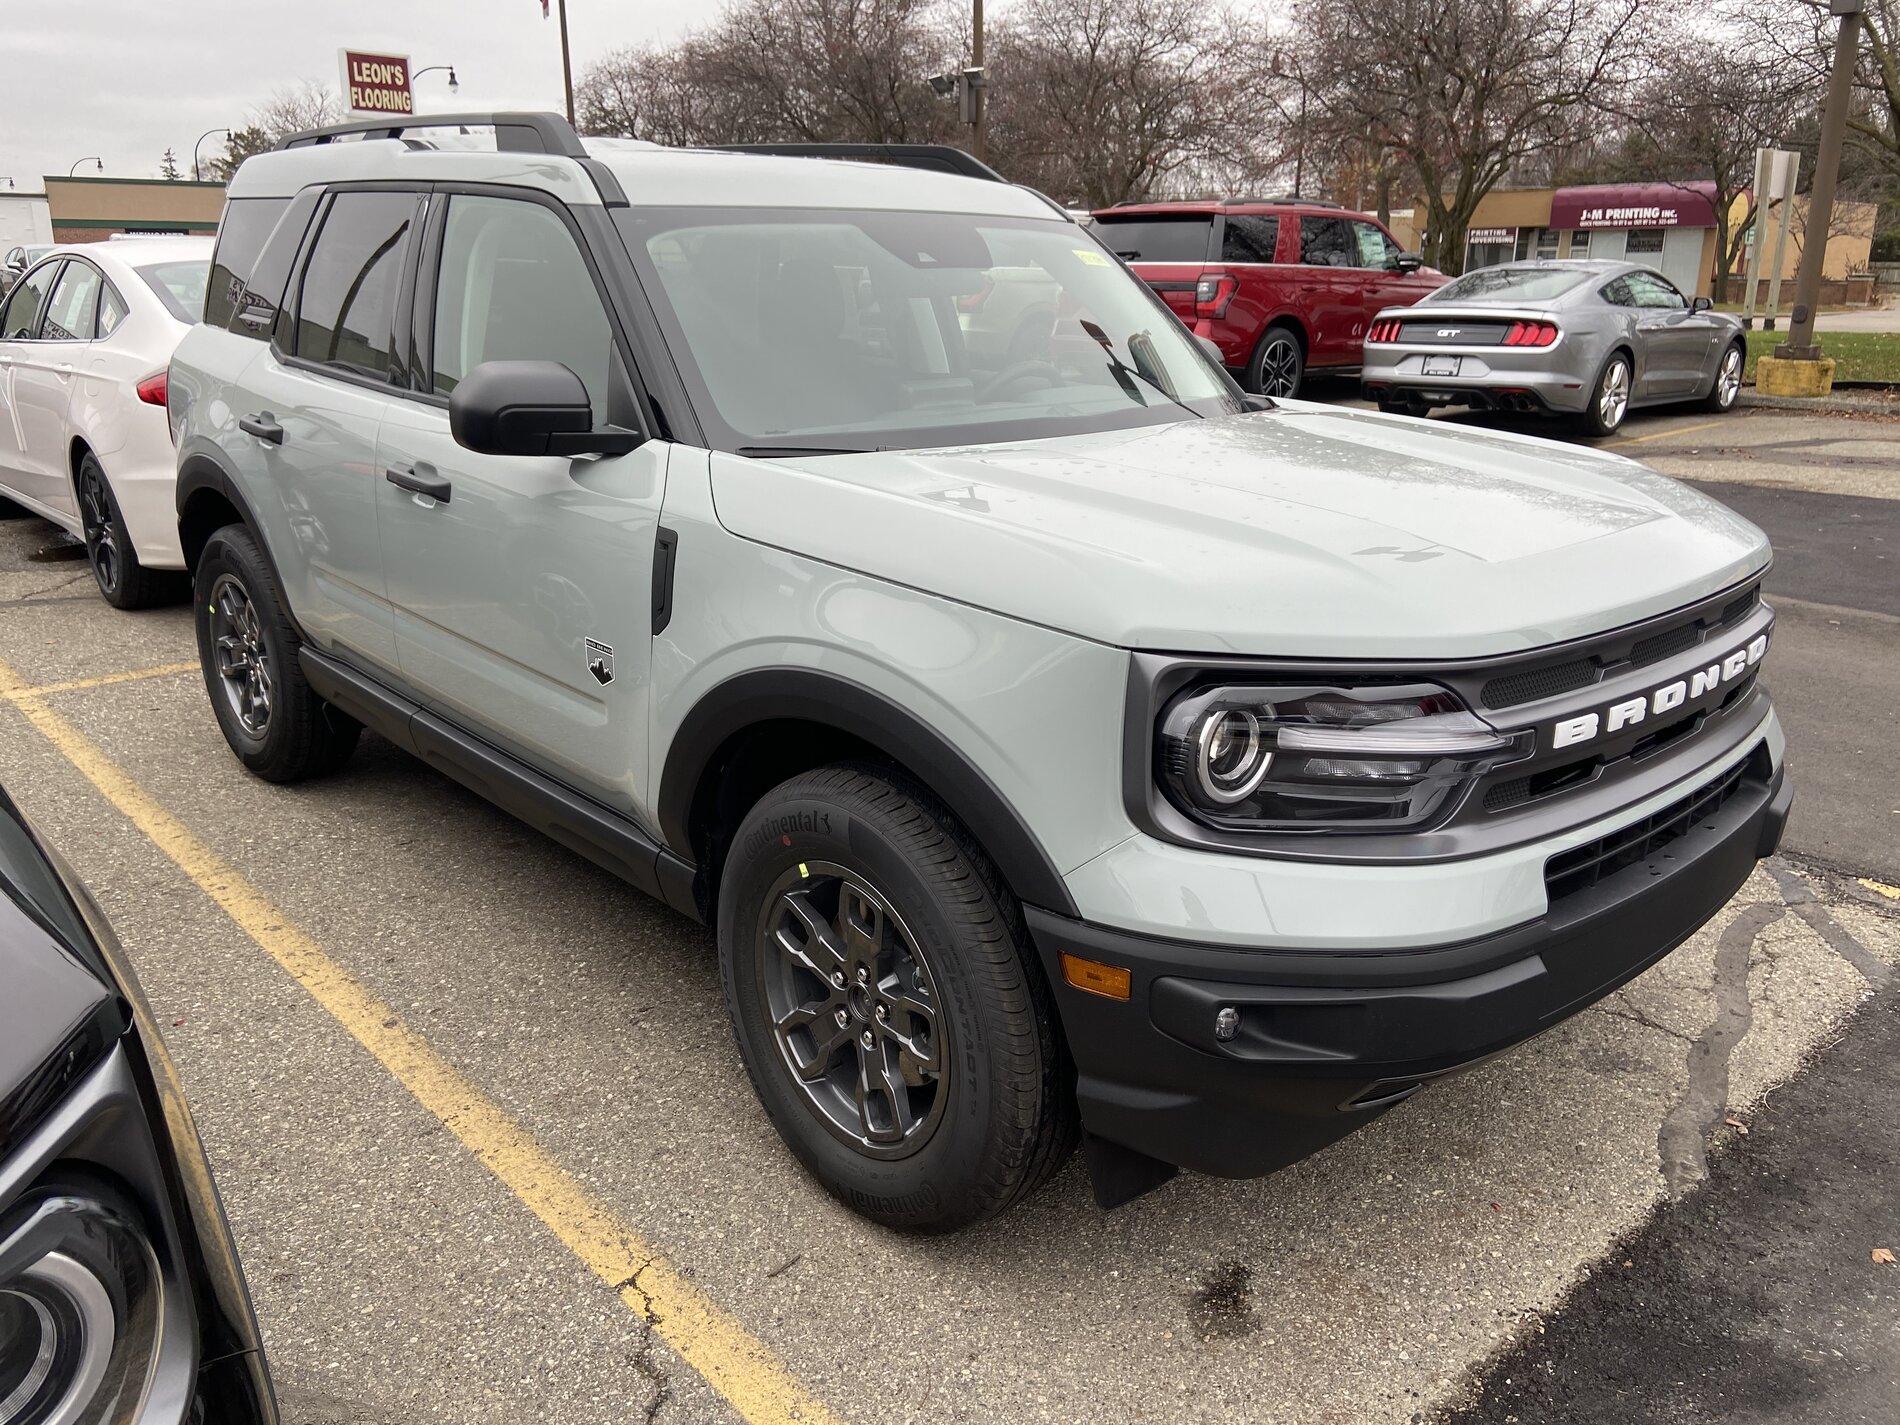 Ford Bronco CACTUS GRAY THREAD!!!! if you’re choosing cactus gray lemme know. I think it’s the best color available at the moment. BA756D87-9E12-4D8A-83E2-4DE1179D77B0